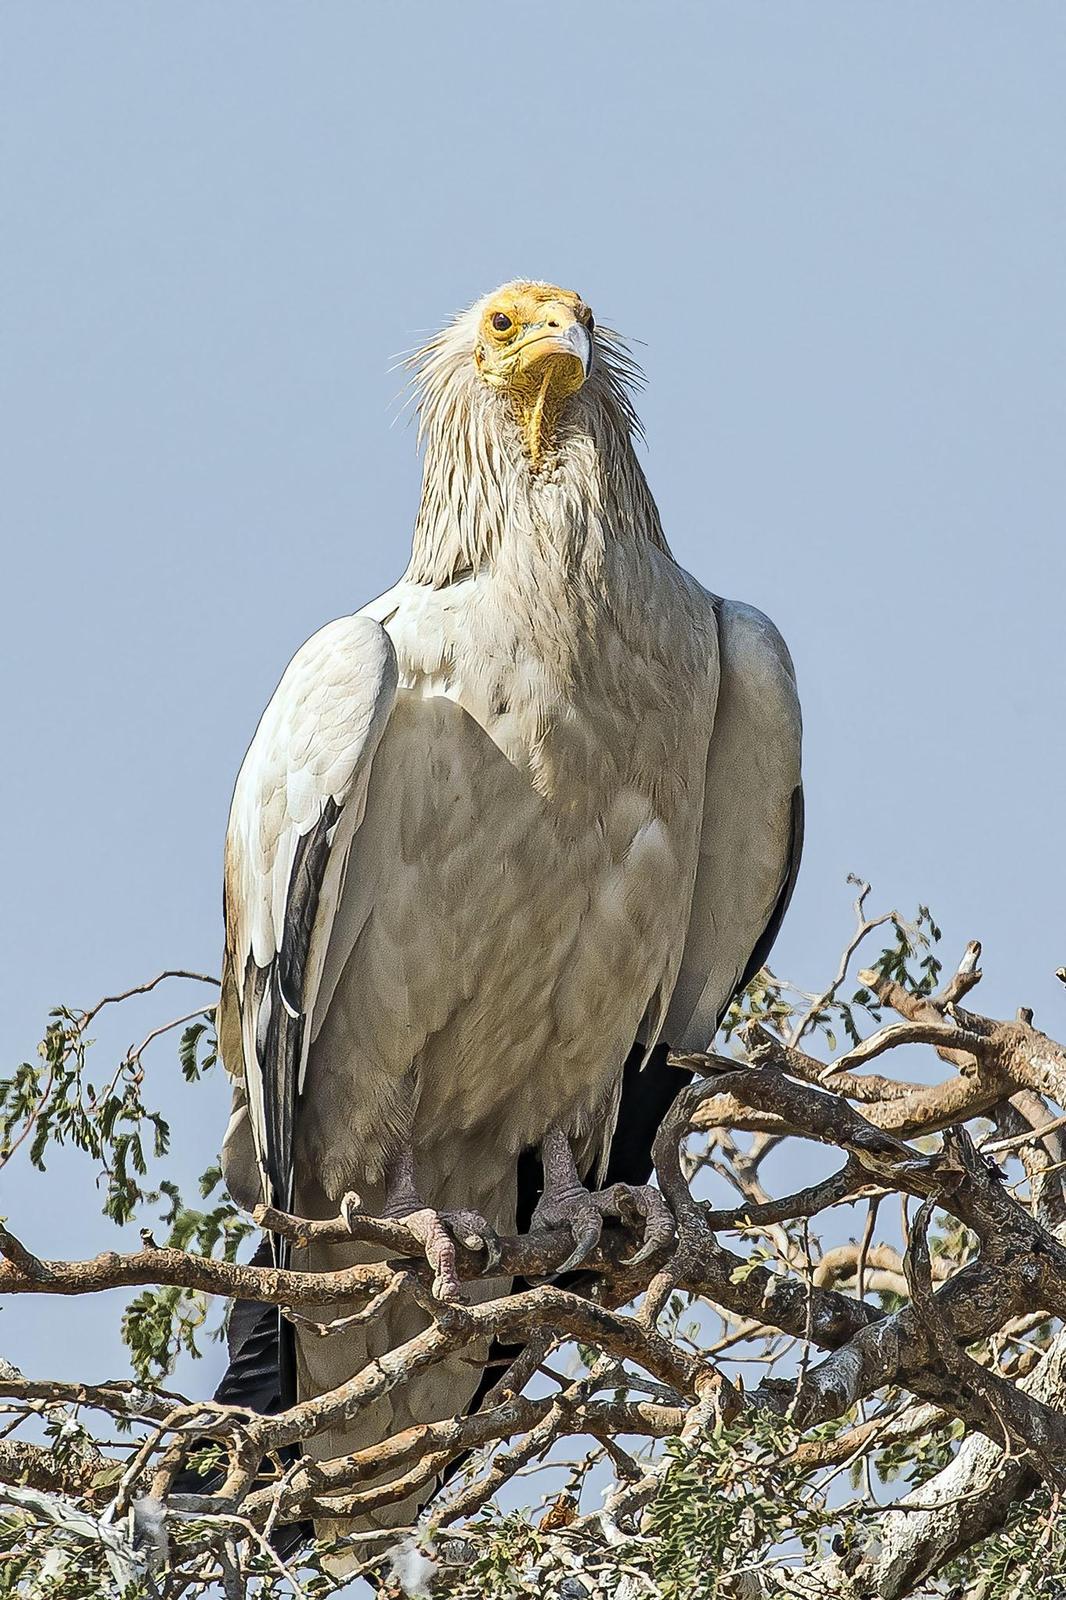 Egyptian Vulture Photo by Michael Phua